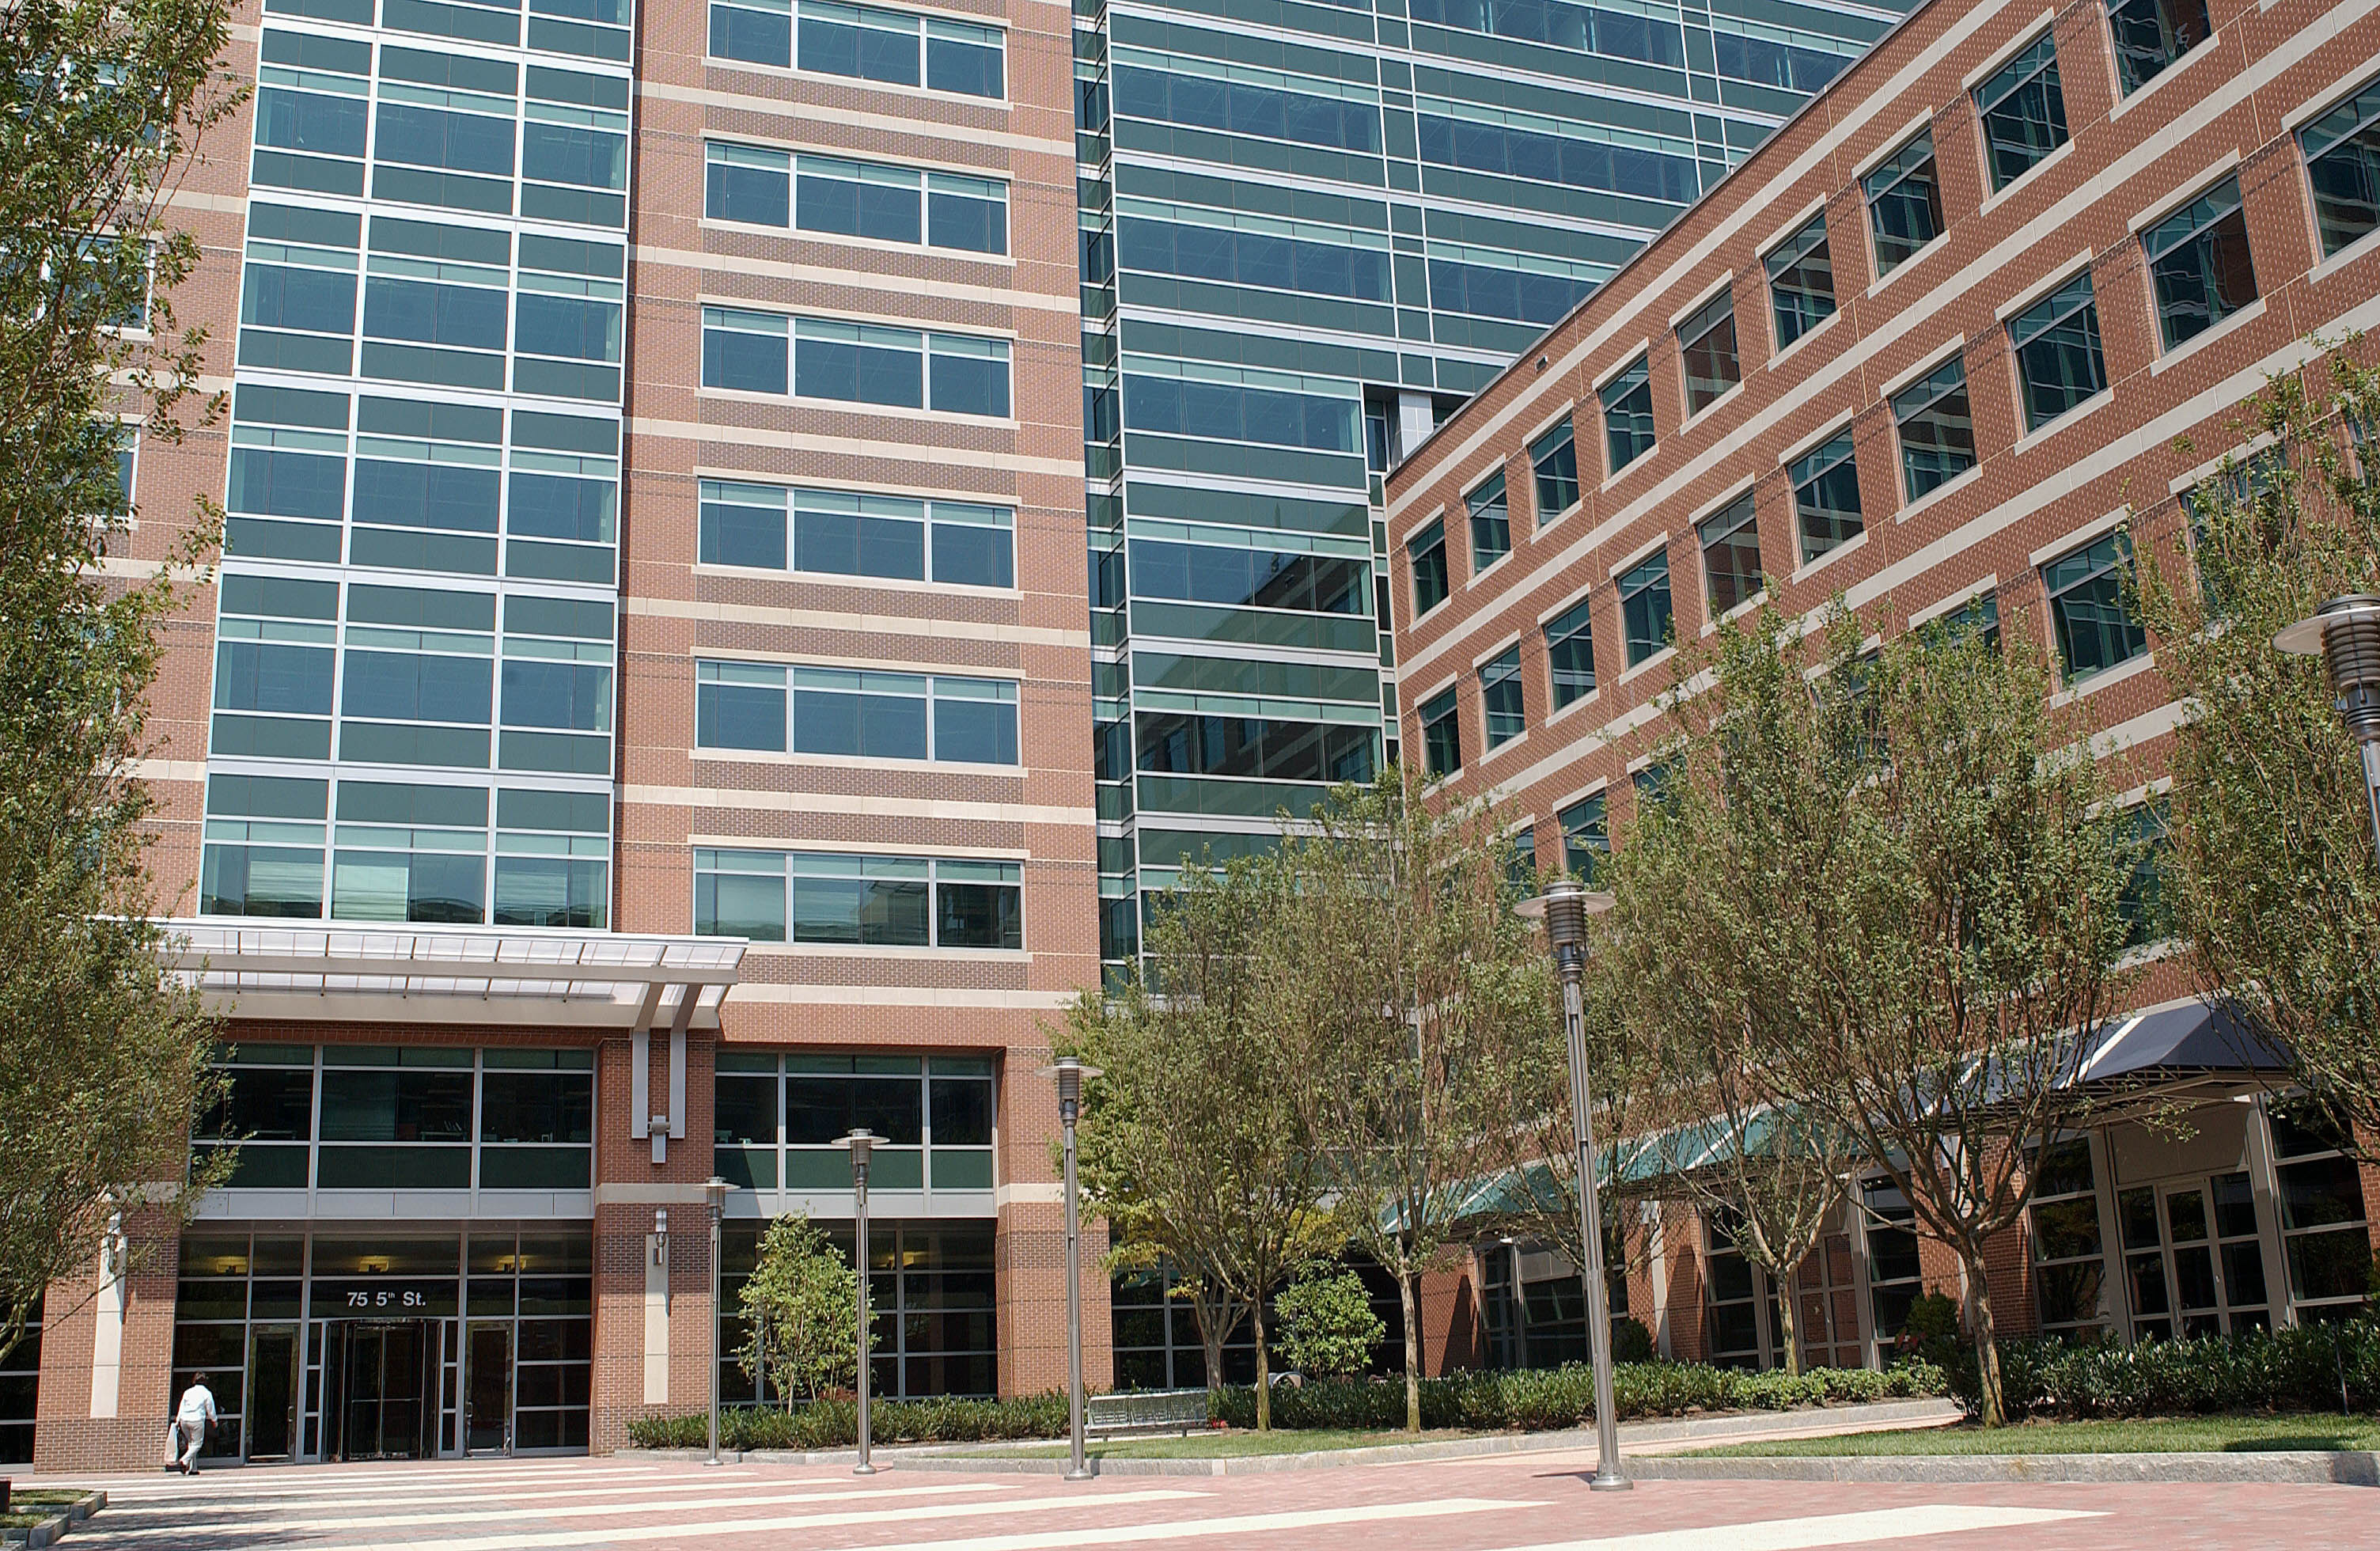 The Centergy Building in Technology Square is home to the ATDC, Georgia Tech's accelerator for technology companies.